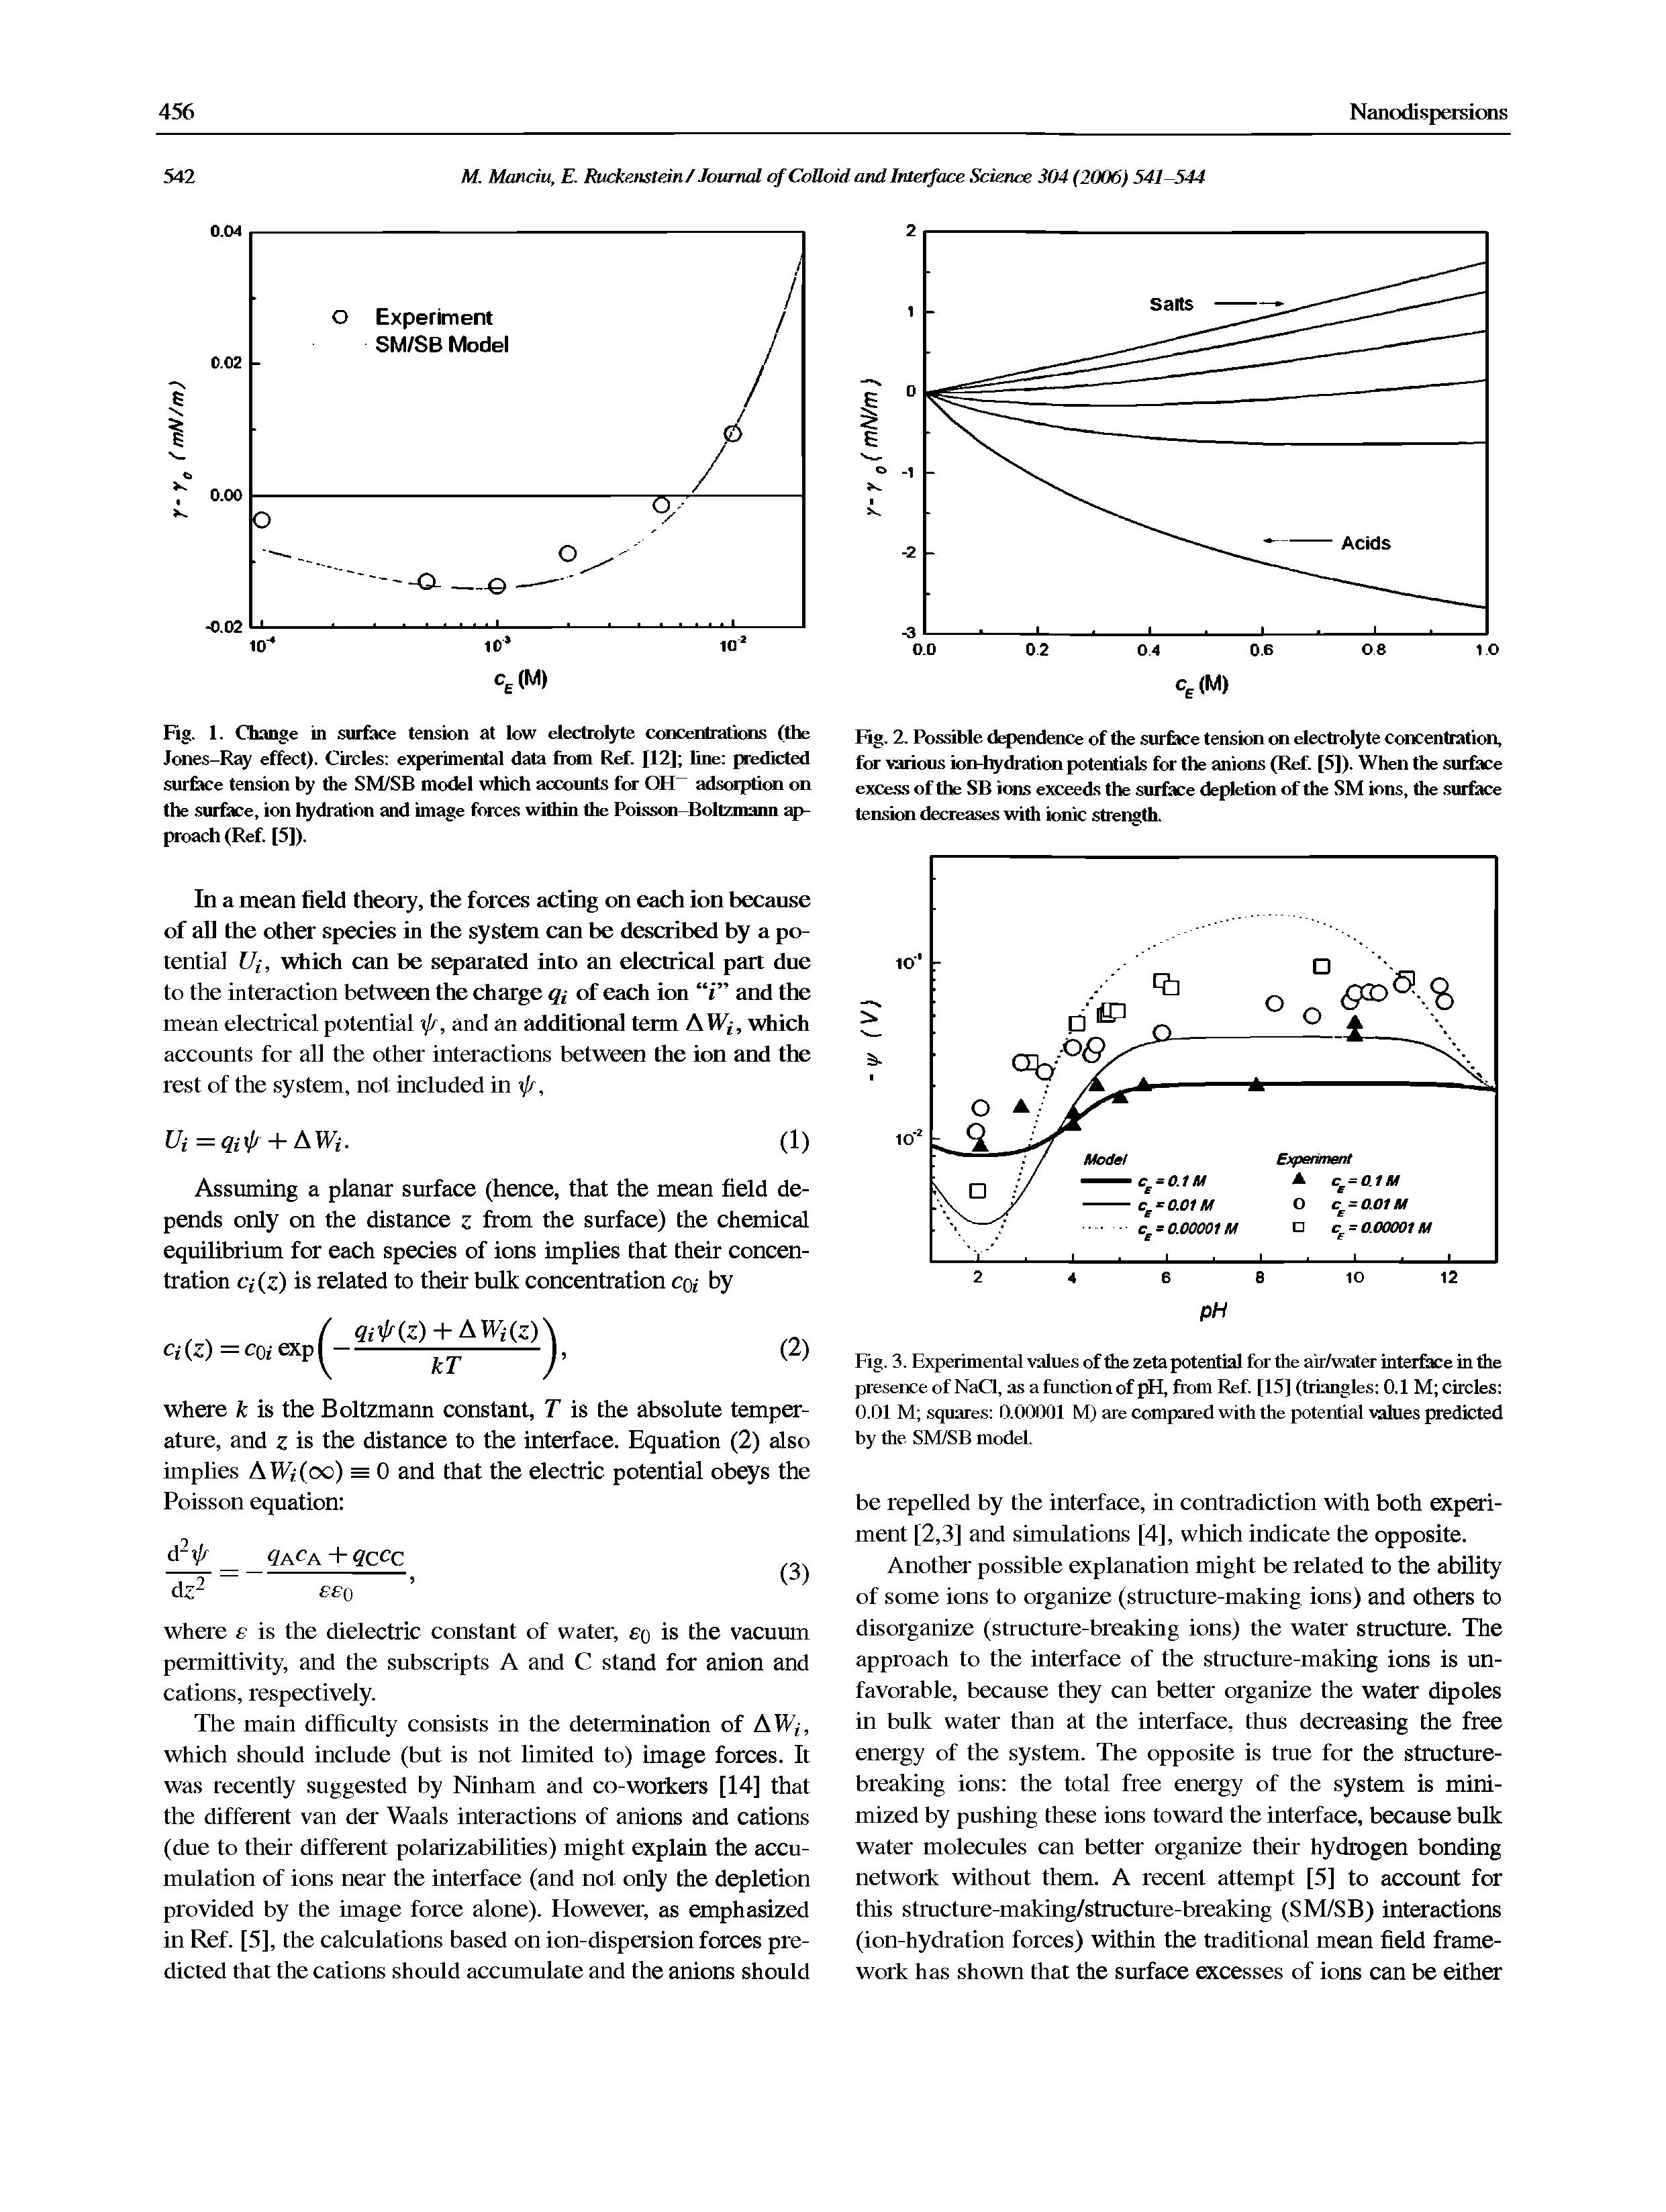 Fig. 1. Change in surface tension at low electrolyte concentrations (the Jones-Ray effect). Circles experimental data from Ref. 112] line predicted surface tension by the SM/SB model which accounts for OH adsorption on the surface, ion hydration and image forces within the Poisson Boltzmann approach (Ref. [5]).